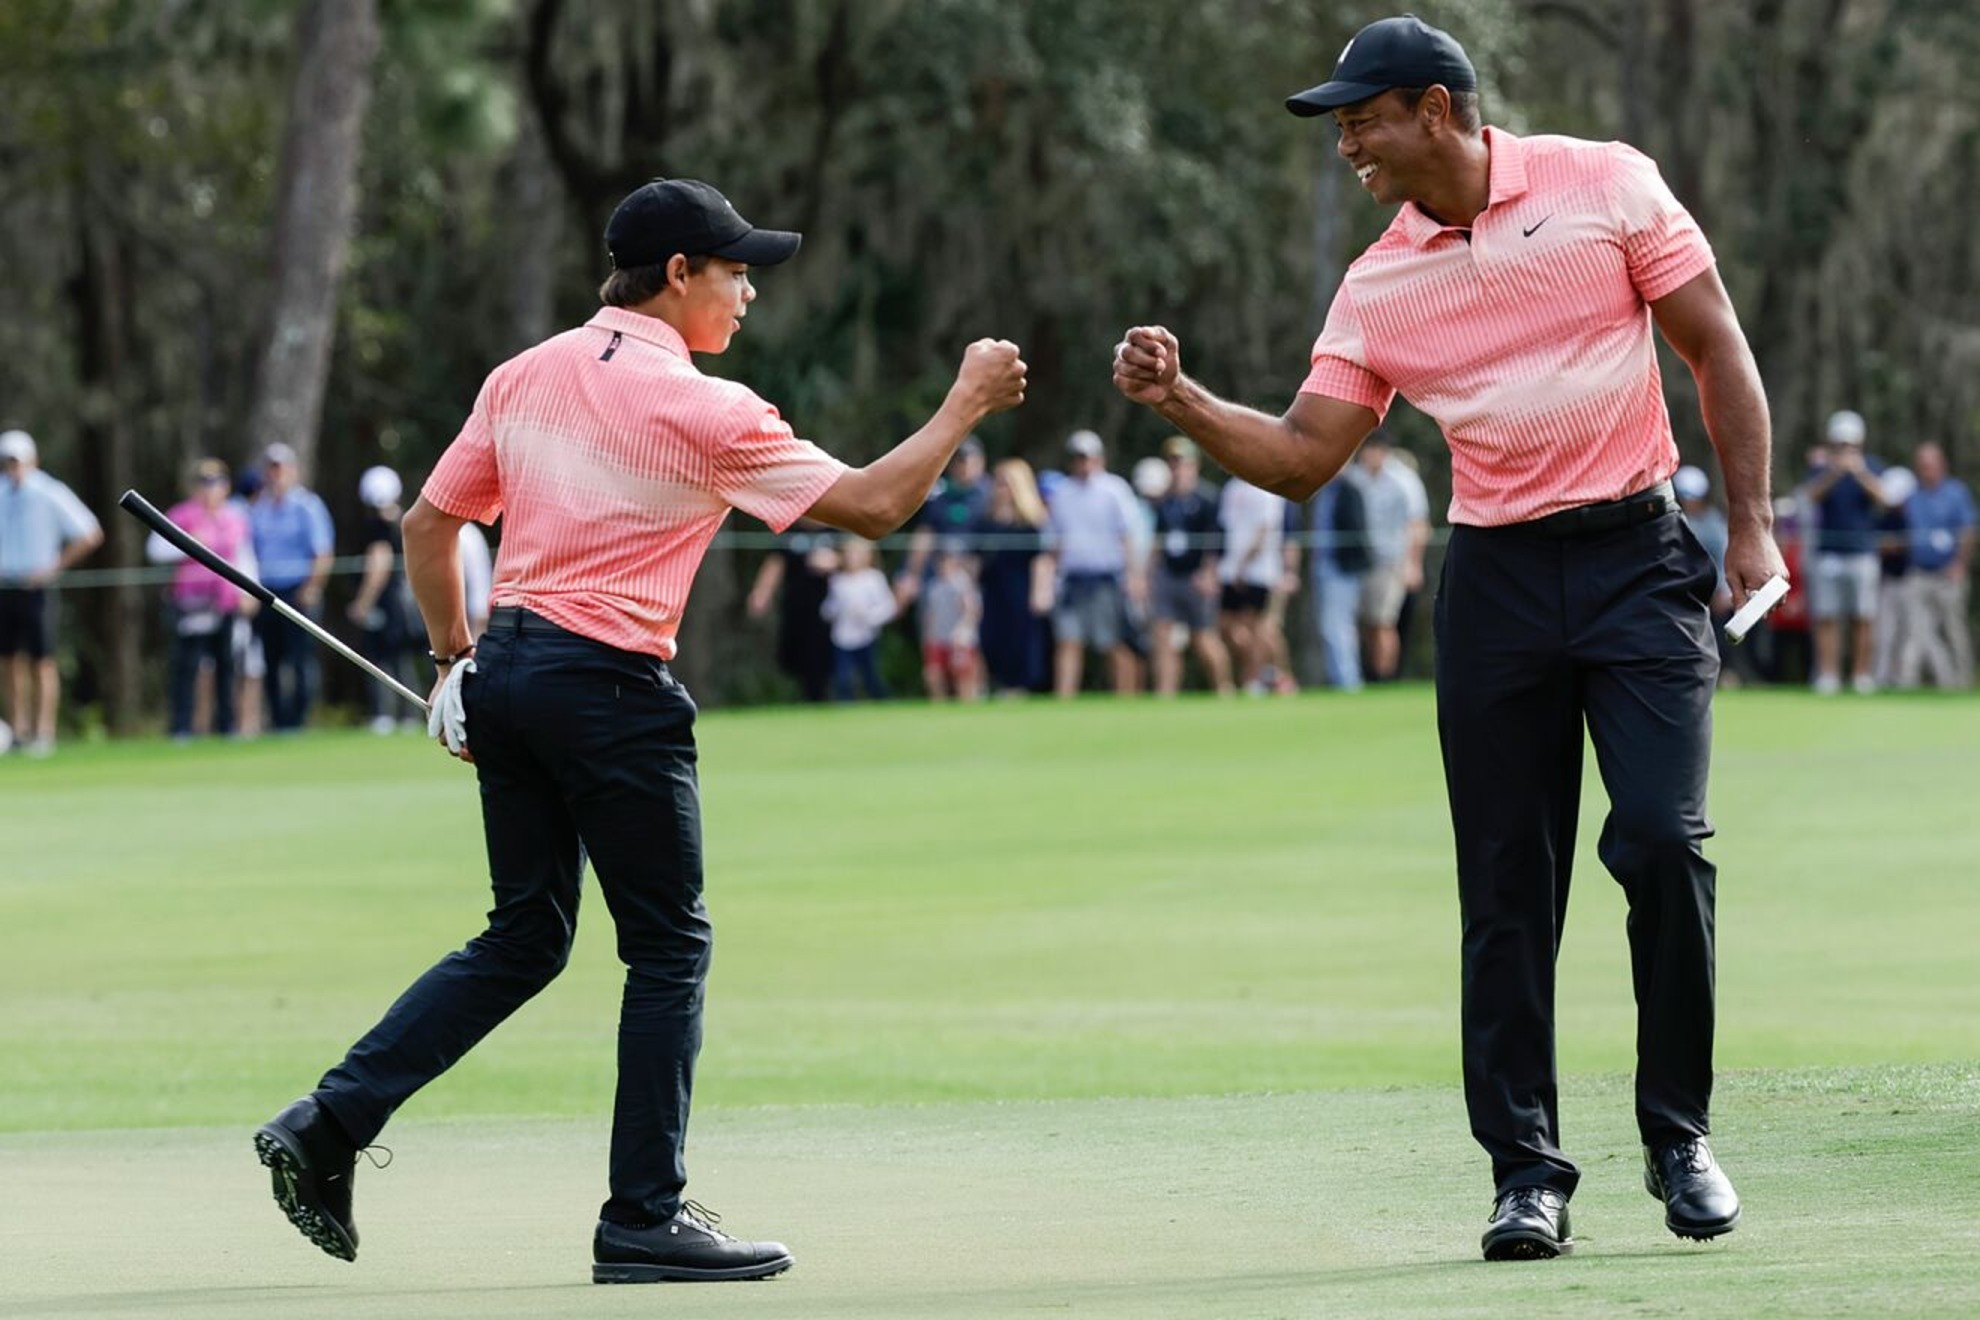 Sunday Red trademark: Is Tiger Woods setting up a new clothing